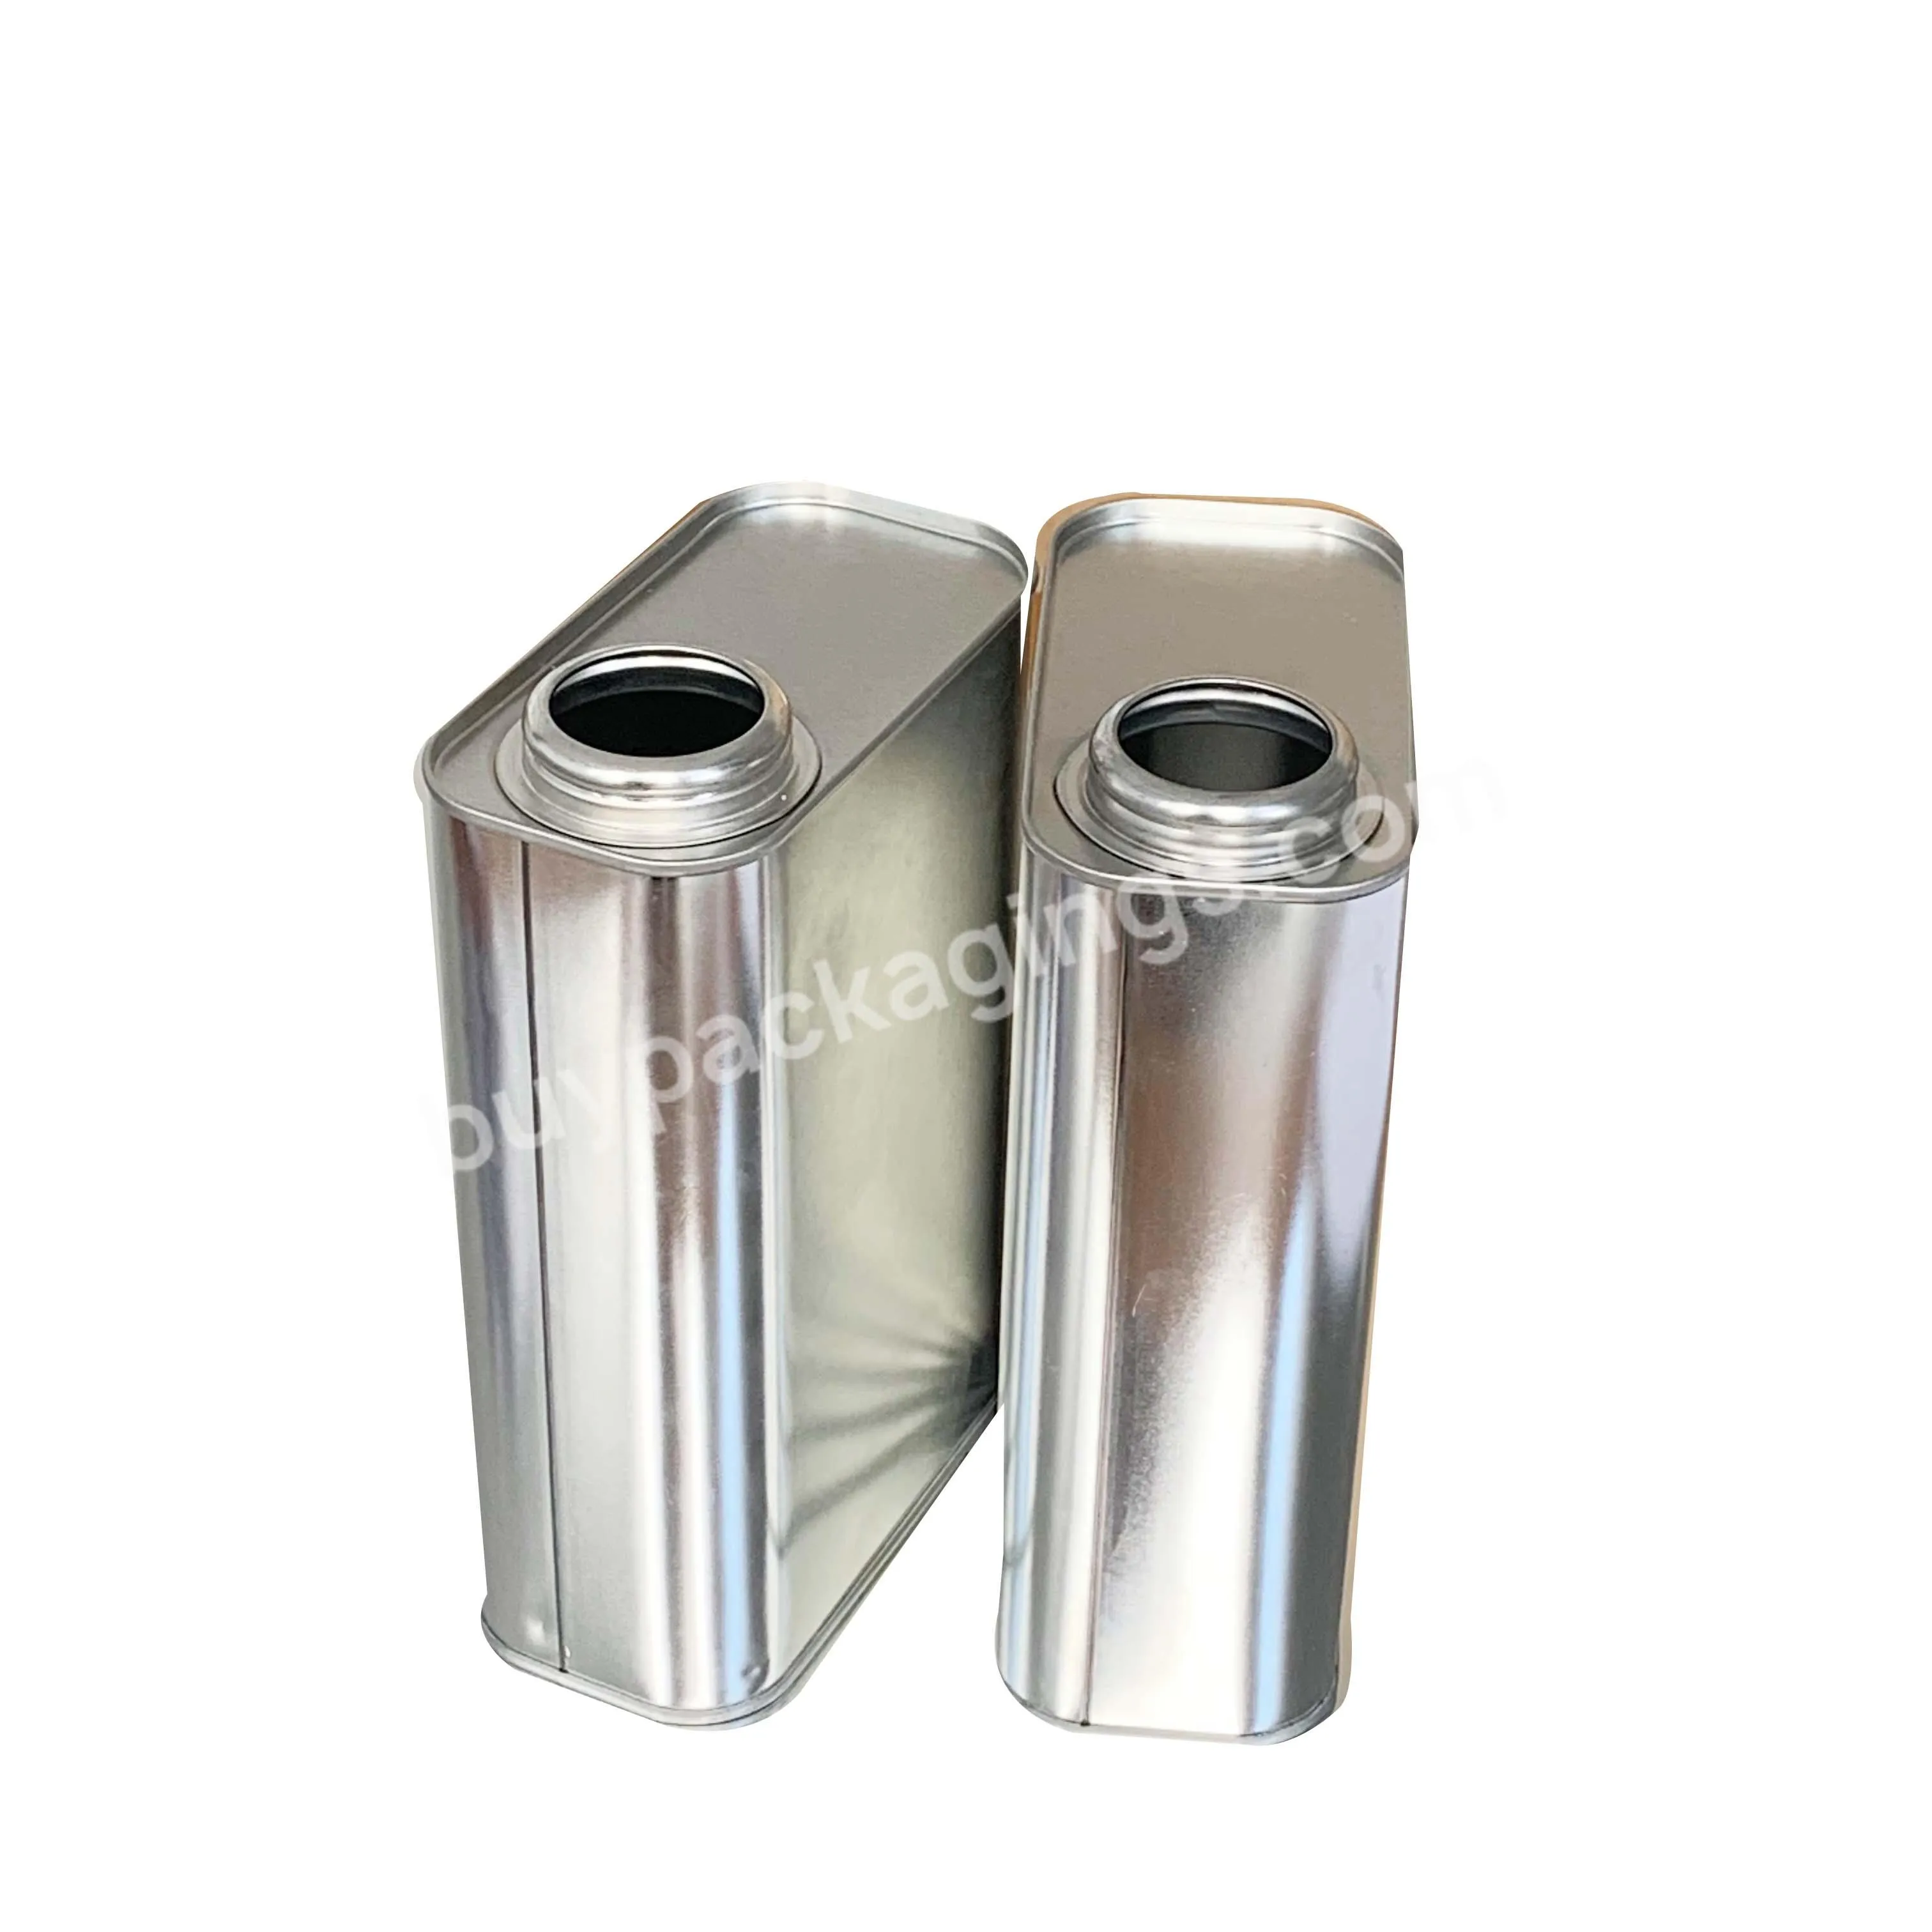 Jt Tin Can For Oil Or Paint Packaging Empty Square Can Freely Sample High Quality Factory Price